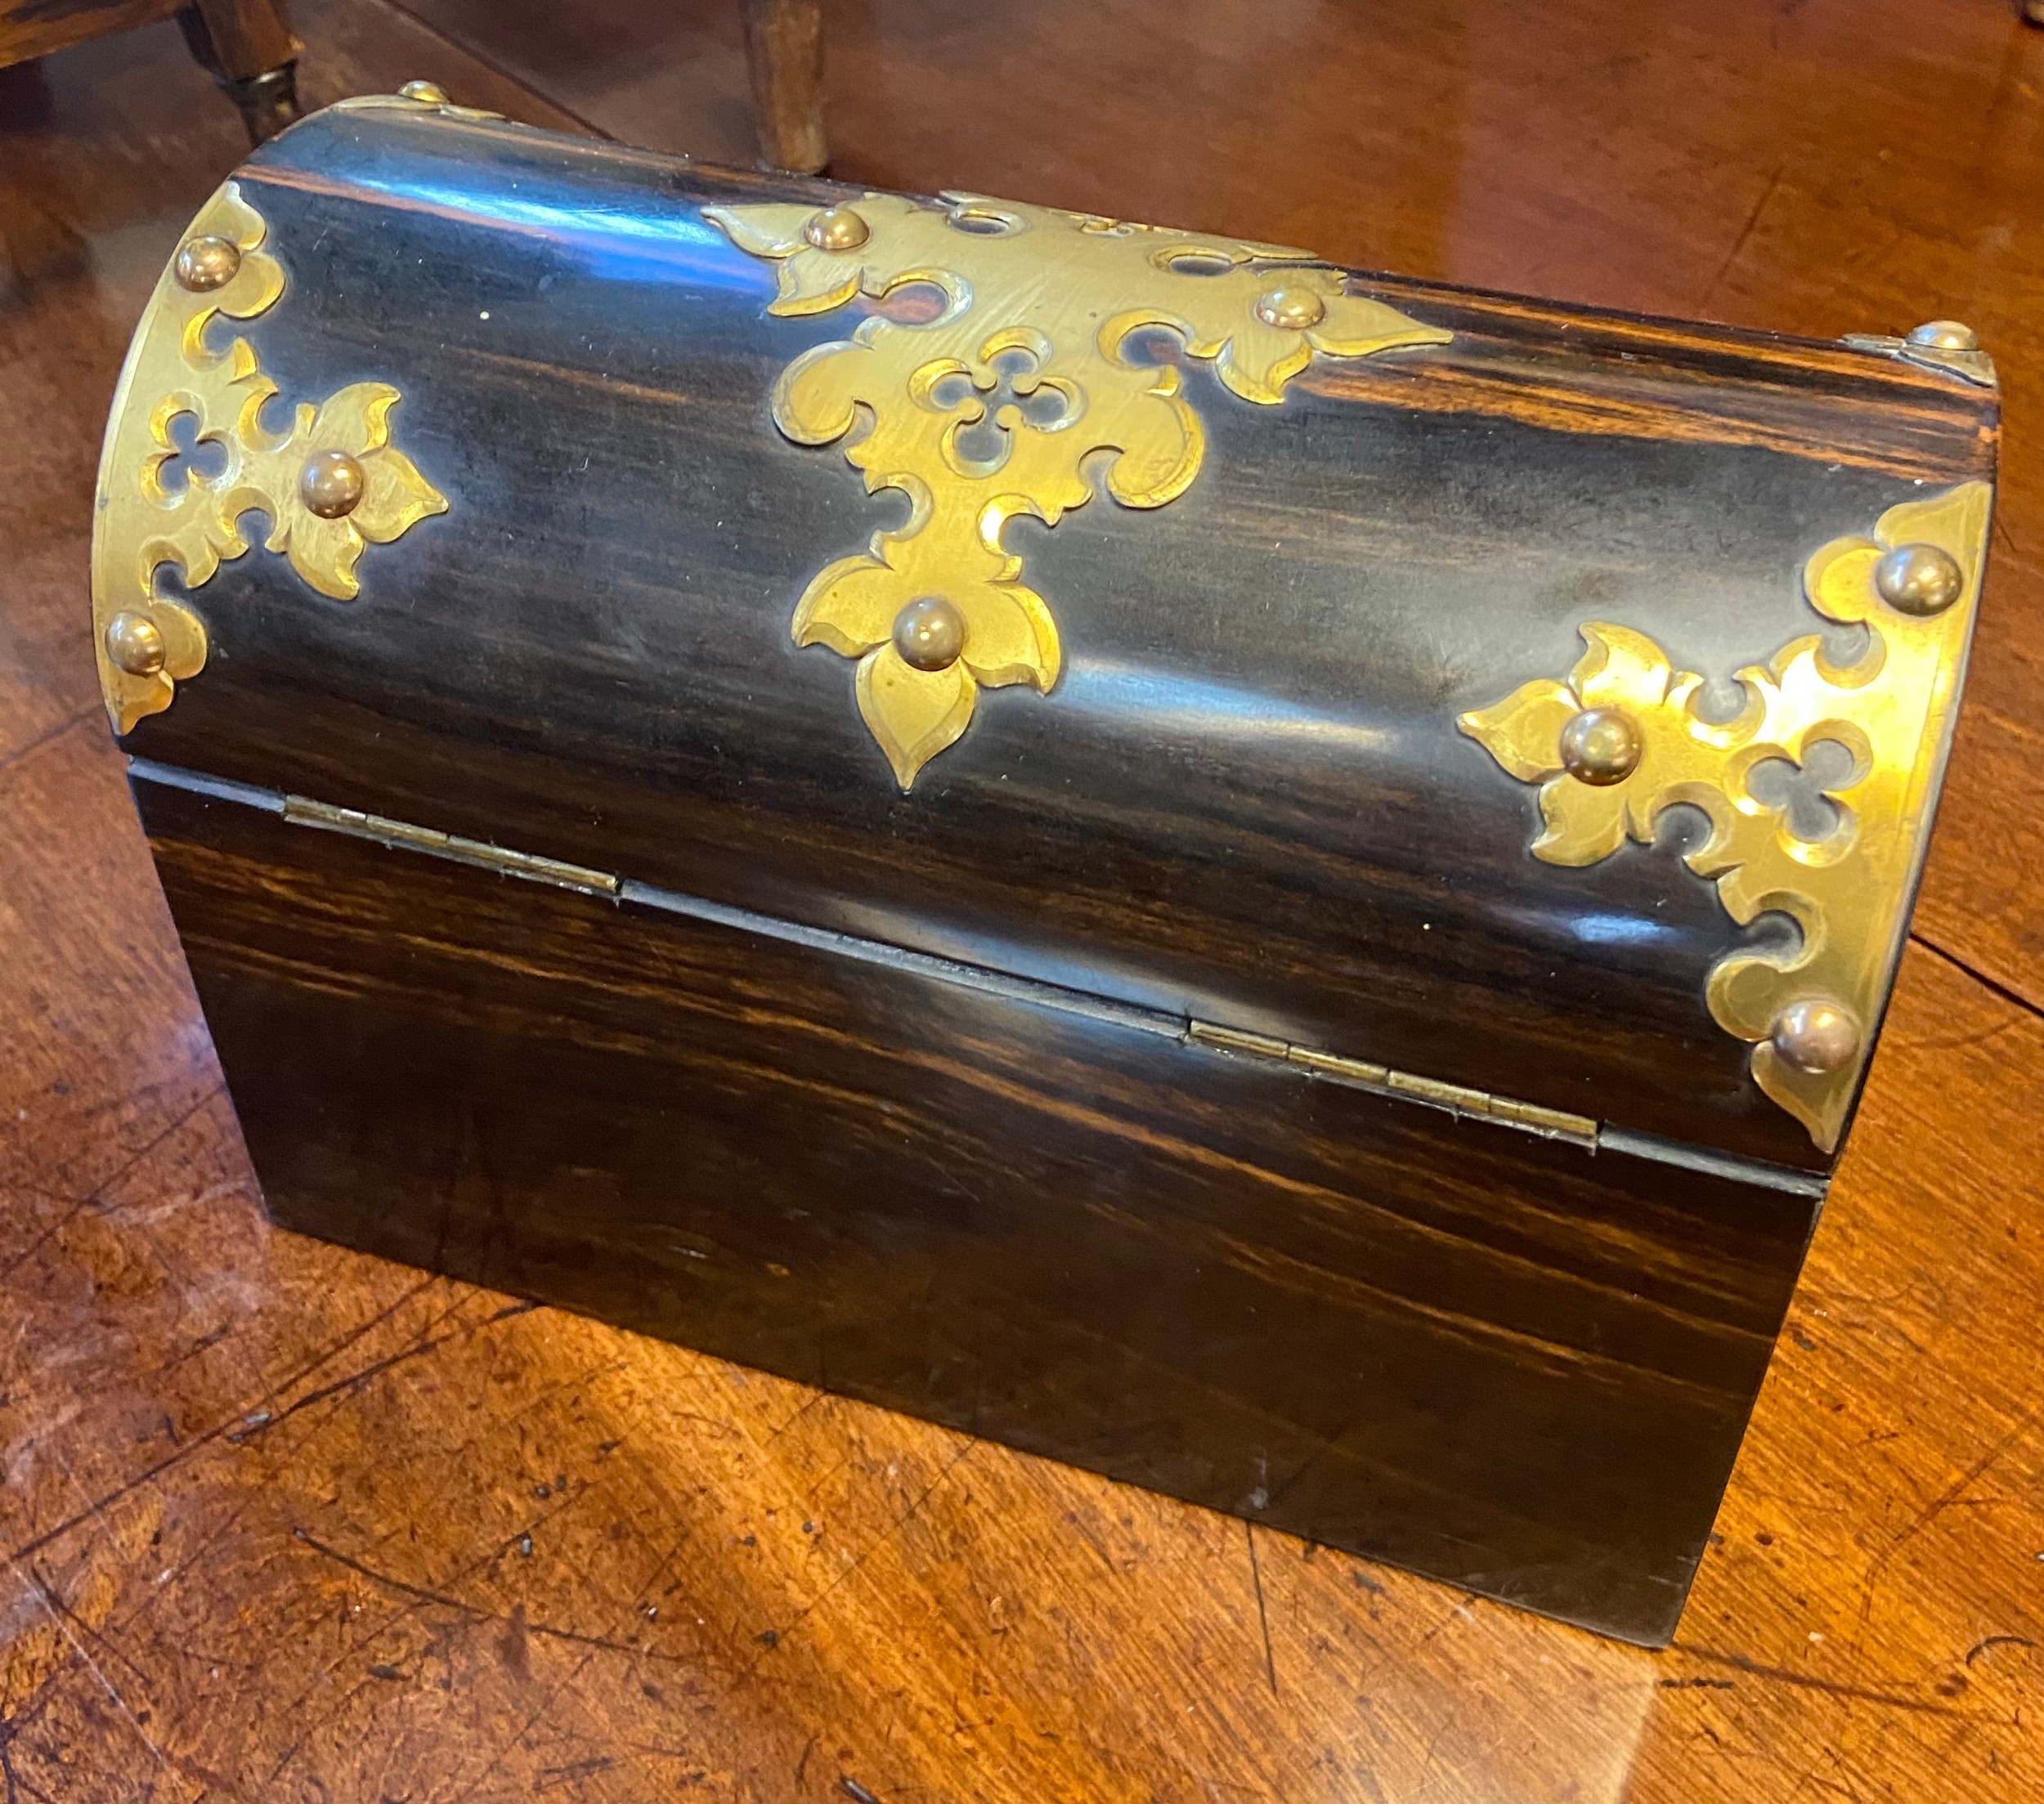 Victorian dome-lid tea caddy, with decorative brass embellishments - Image 3 of 5